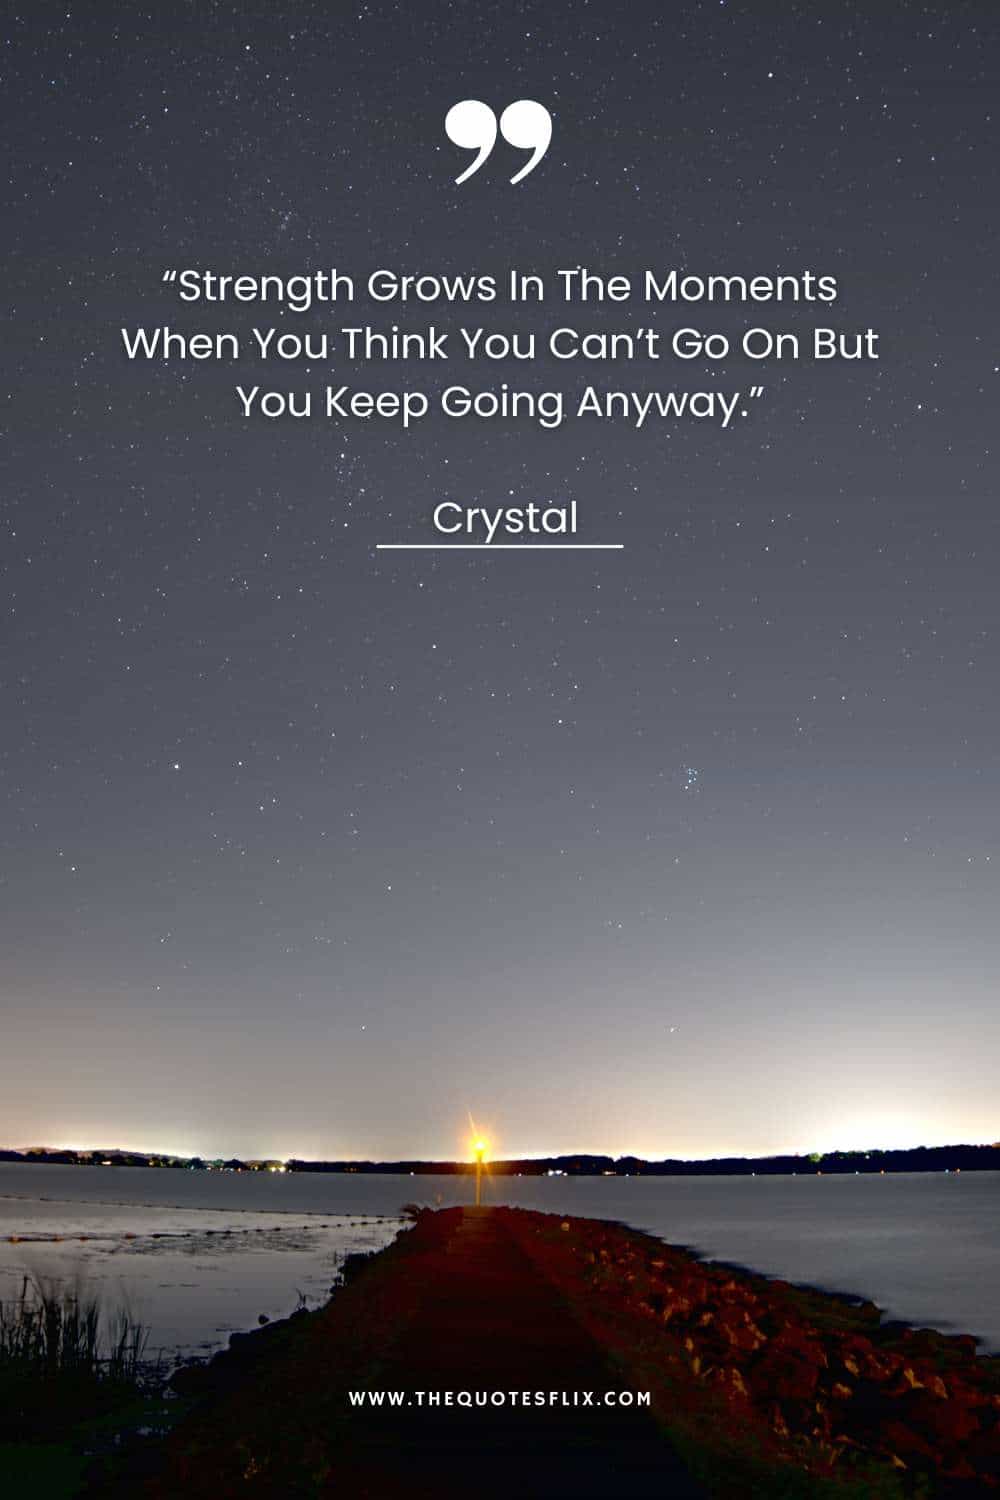 inspiratioinal cancer quotes - strength grows in moments you cant go but keep going